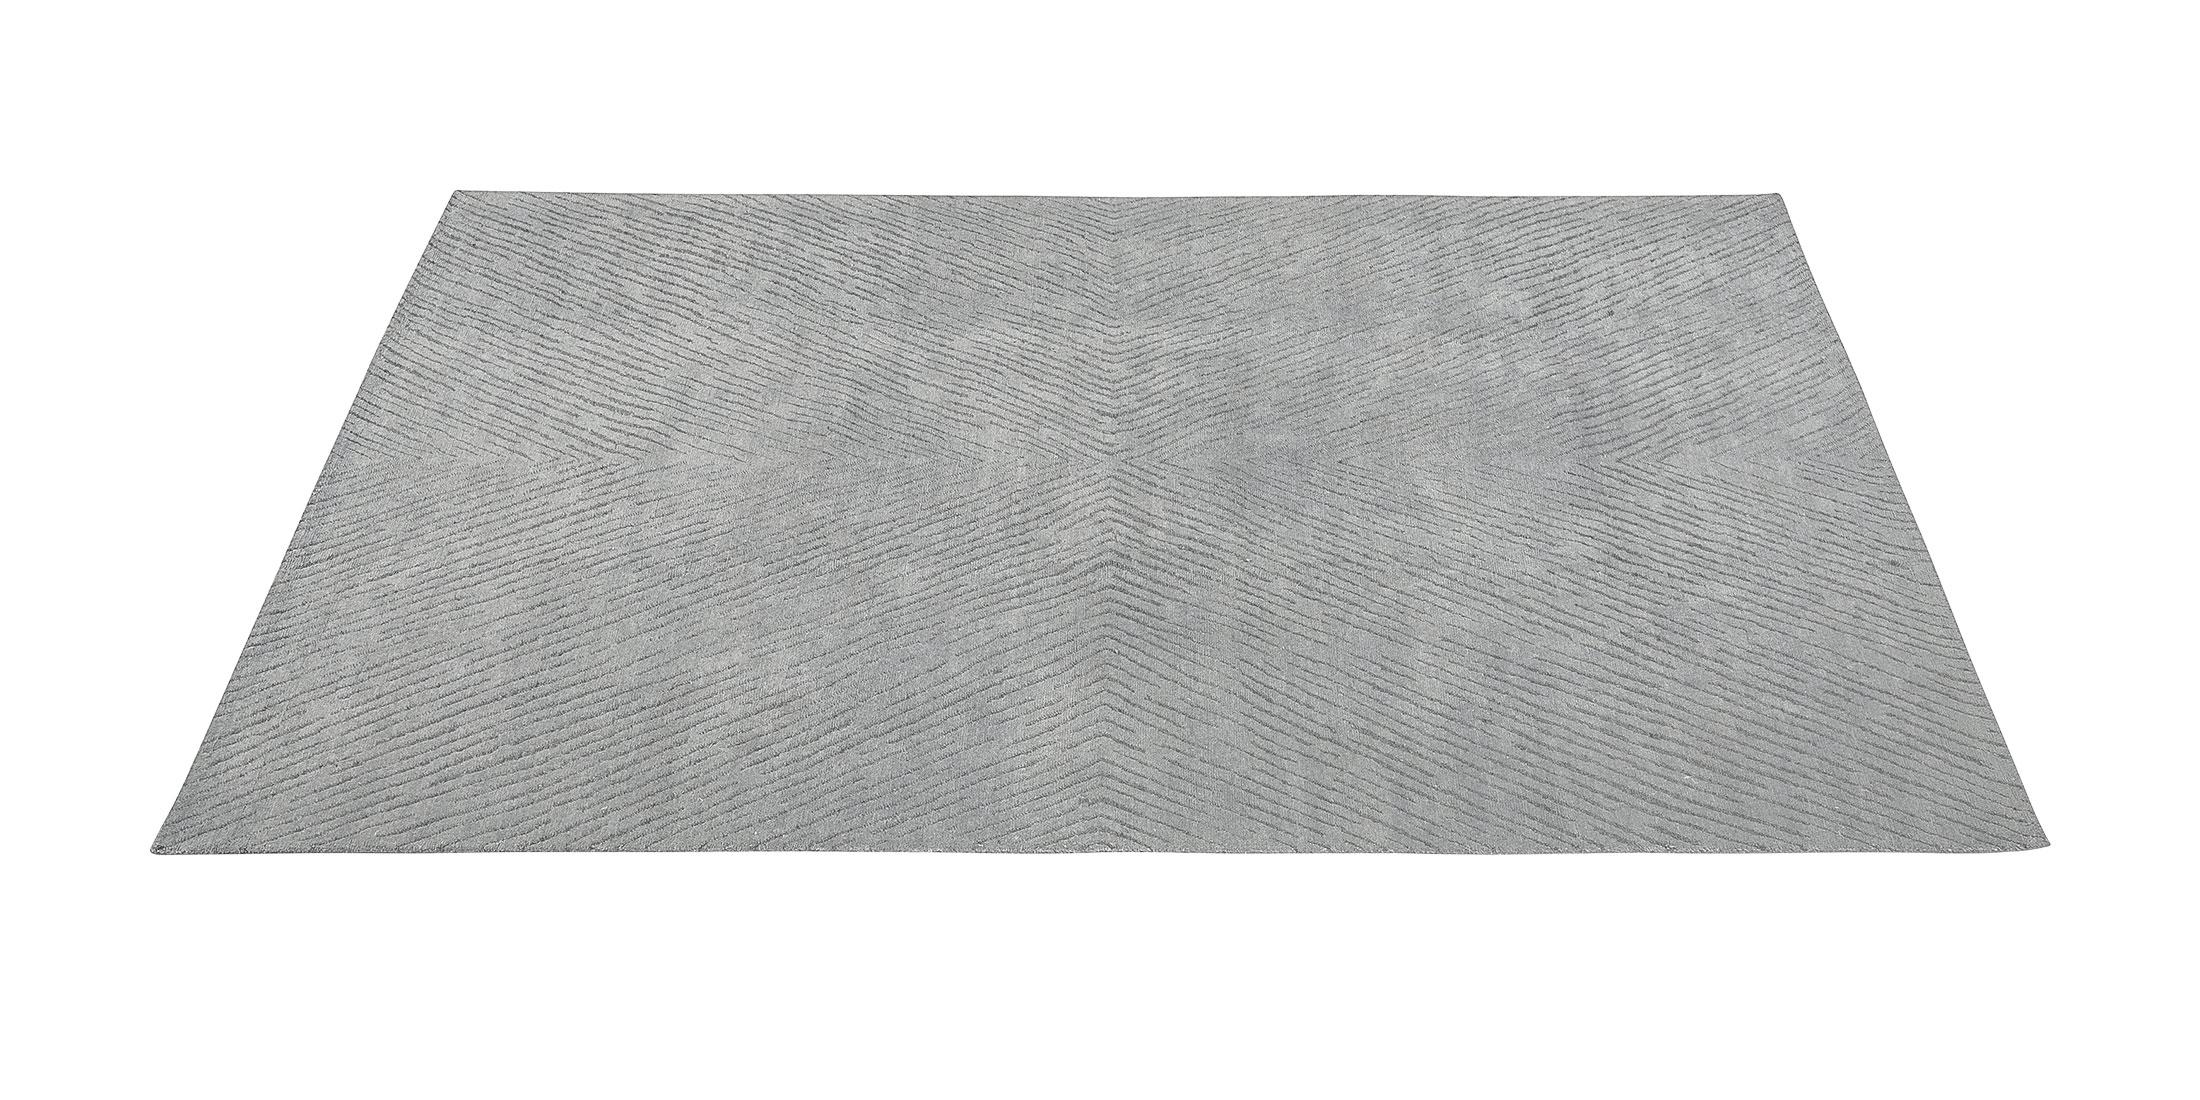 For Sale: Gray (Nickel/Carbon) Ben Soleimani Performance Setta Rug– Handknotted Soft Pile Nickel/Carbon 8'x10' 2